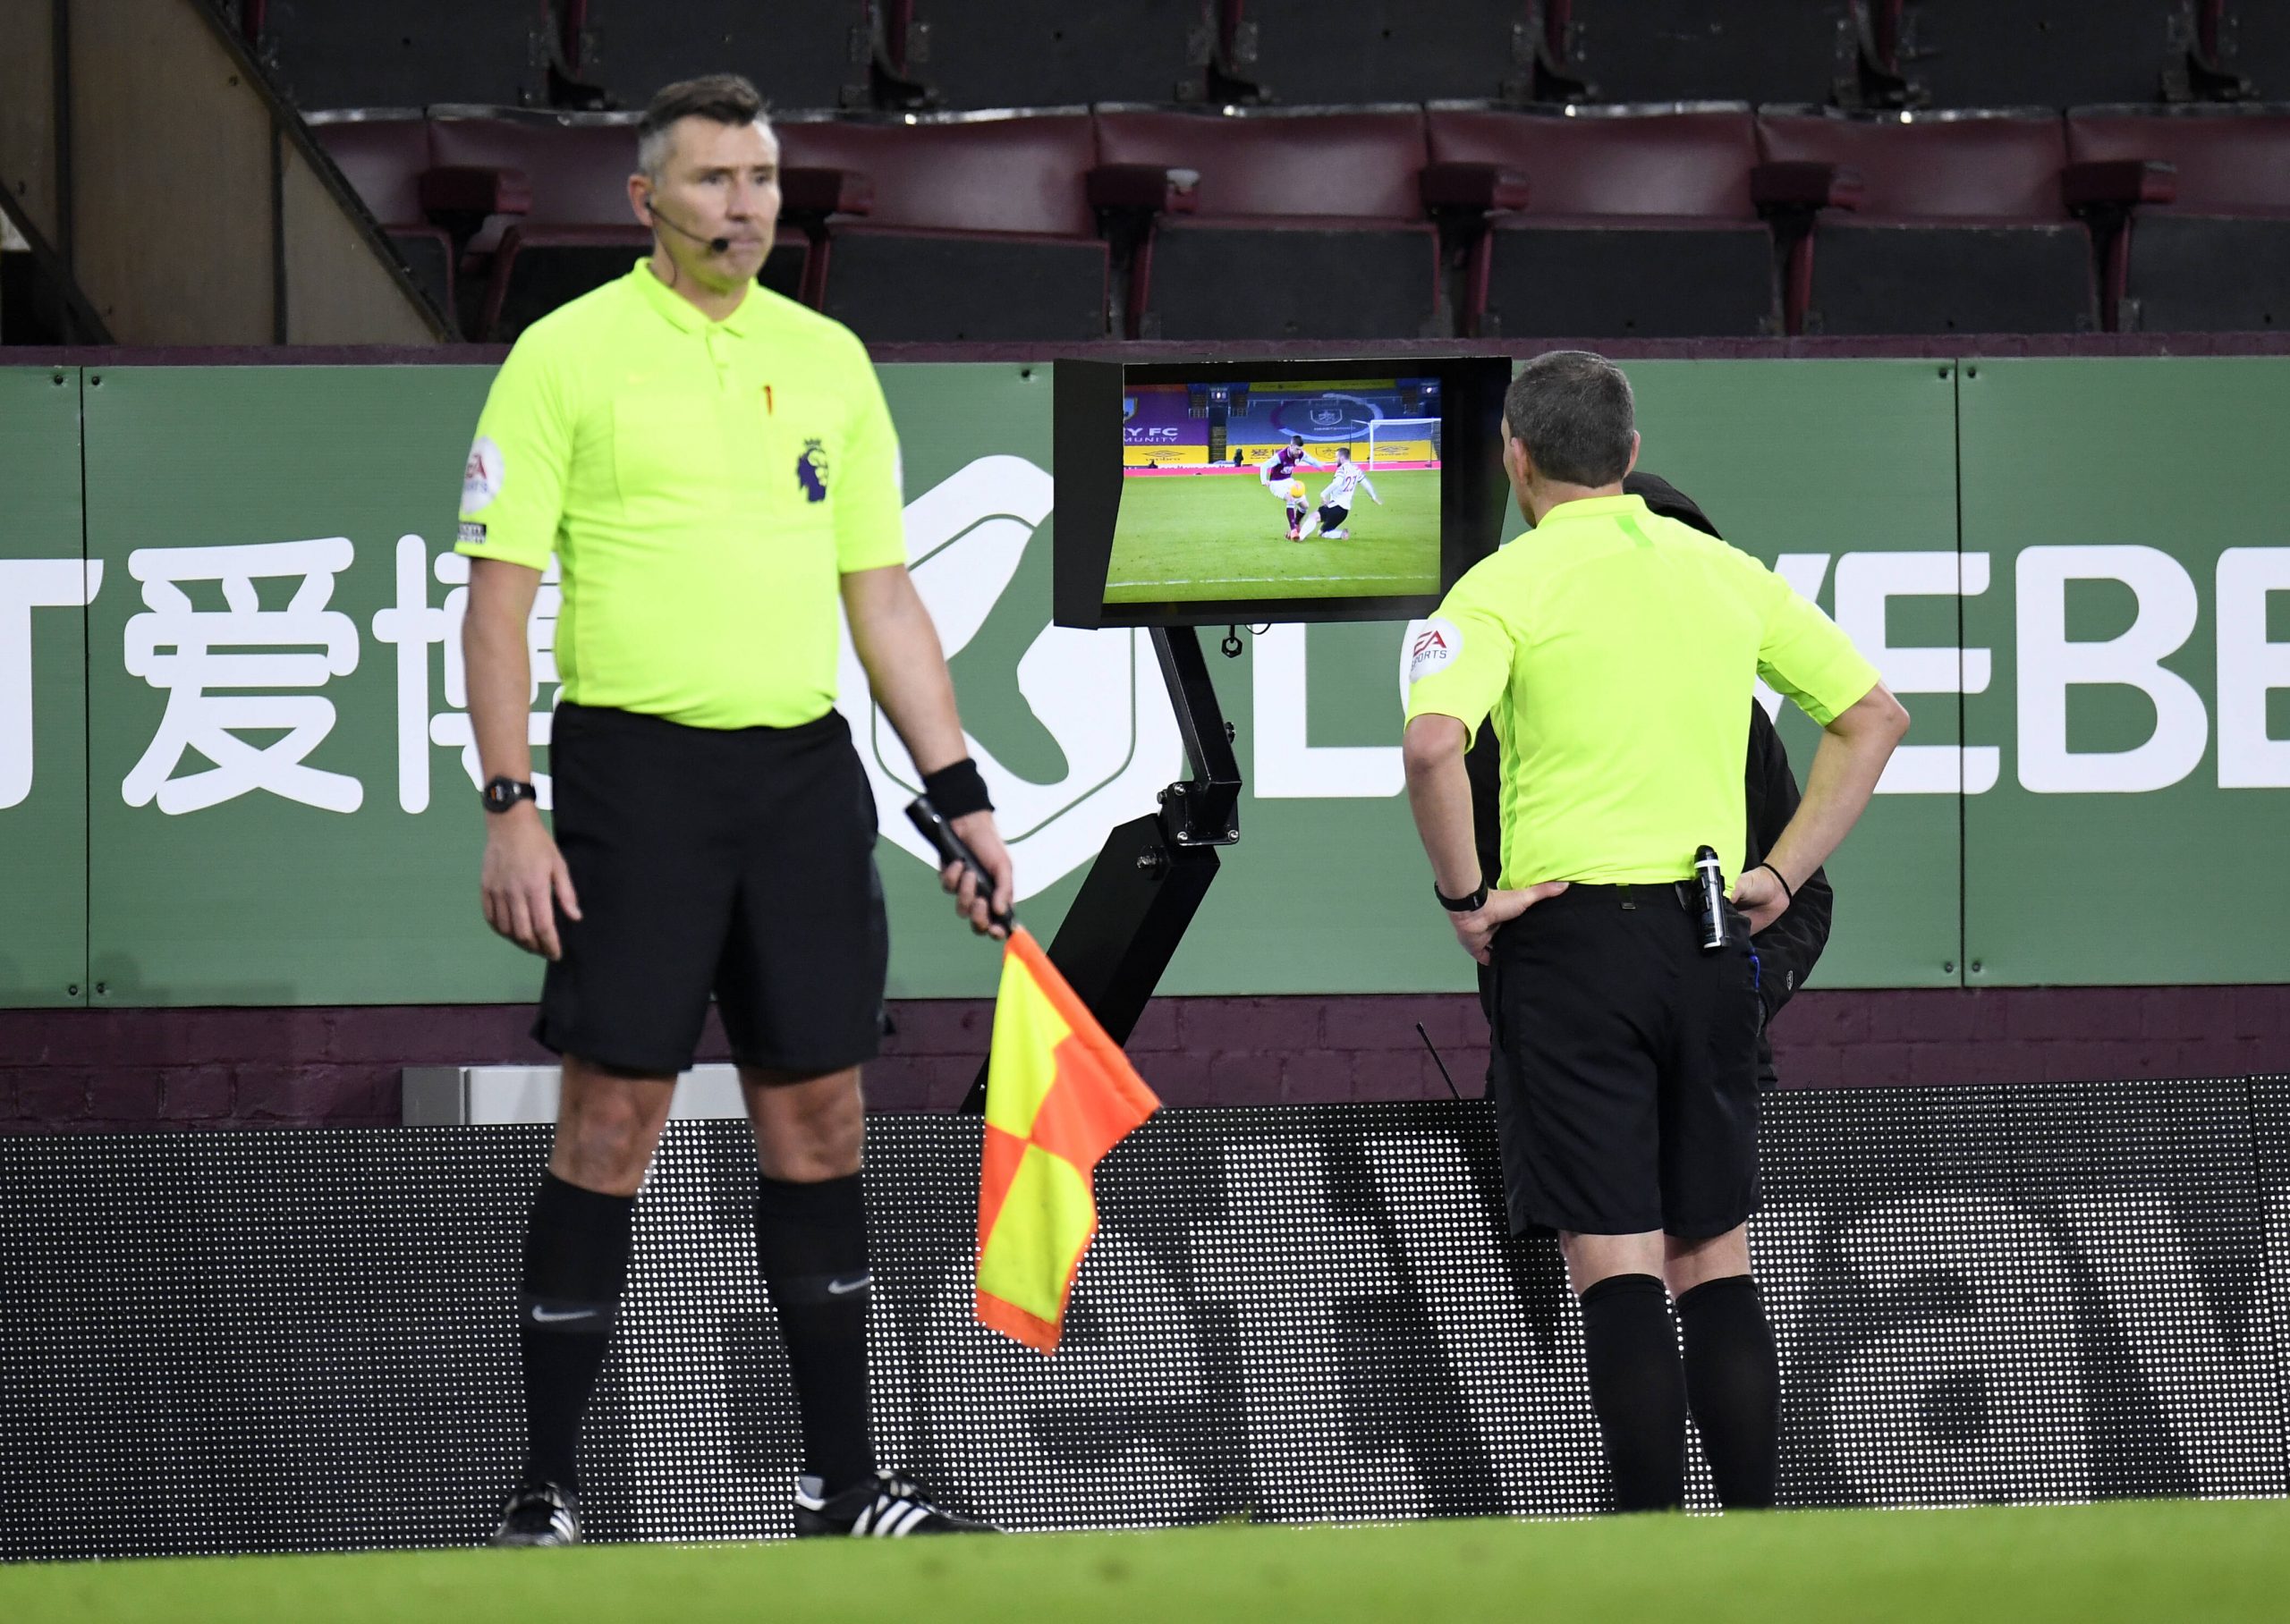 Referee Kevin Friend checks for a foul and consults VAR in a match between Manchester United and Burnley. (imago Images)